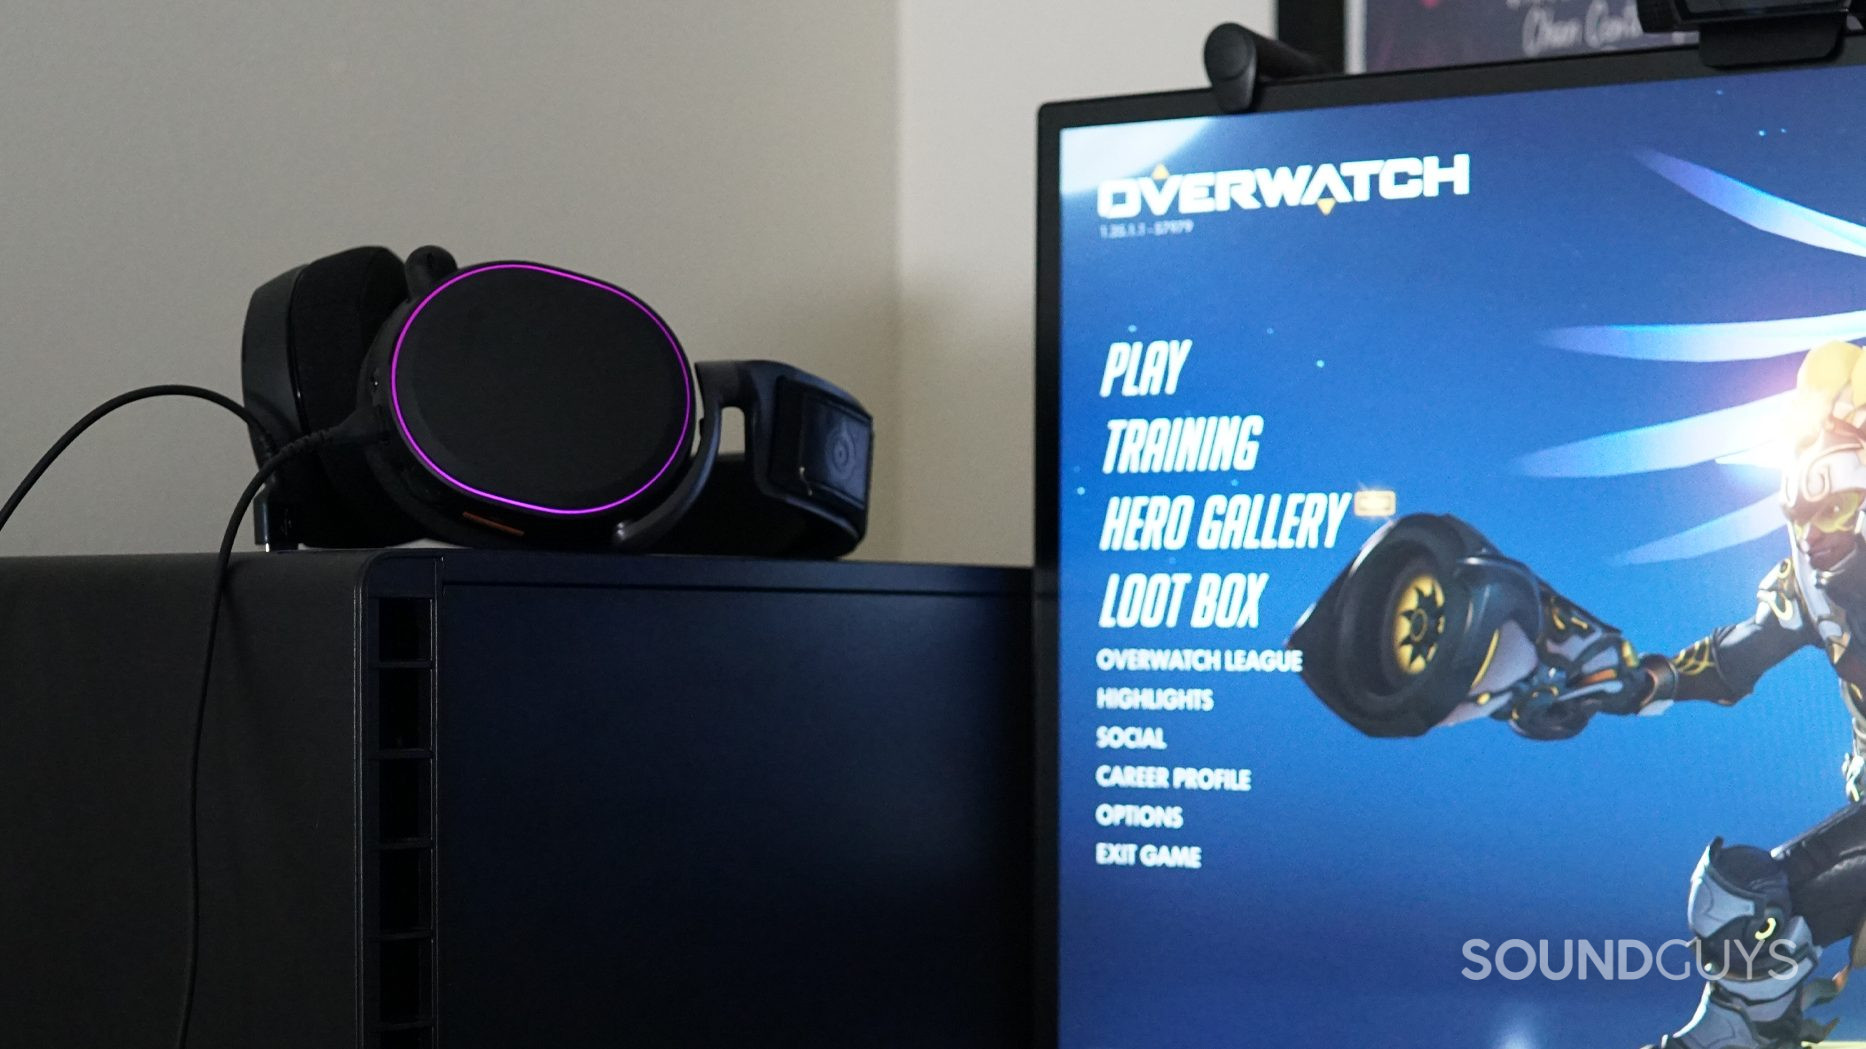 The Arctis Pro gaming headset sits on a desktop PC tower running Overwatch.